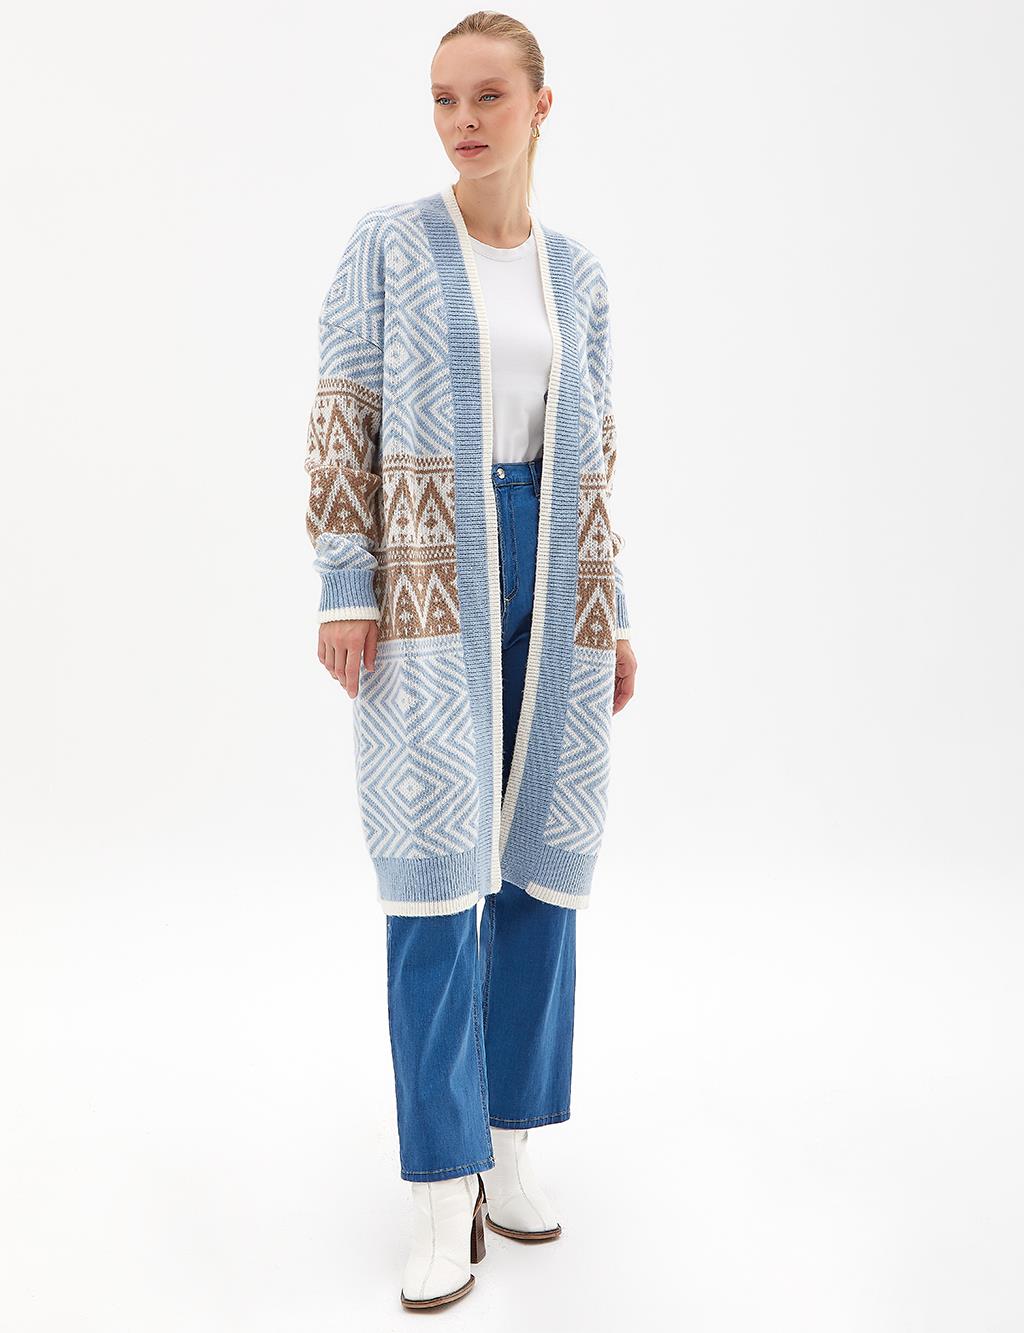 Exclusive Ethnic Patterned Knitwear Cardigan Blue